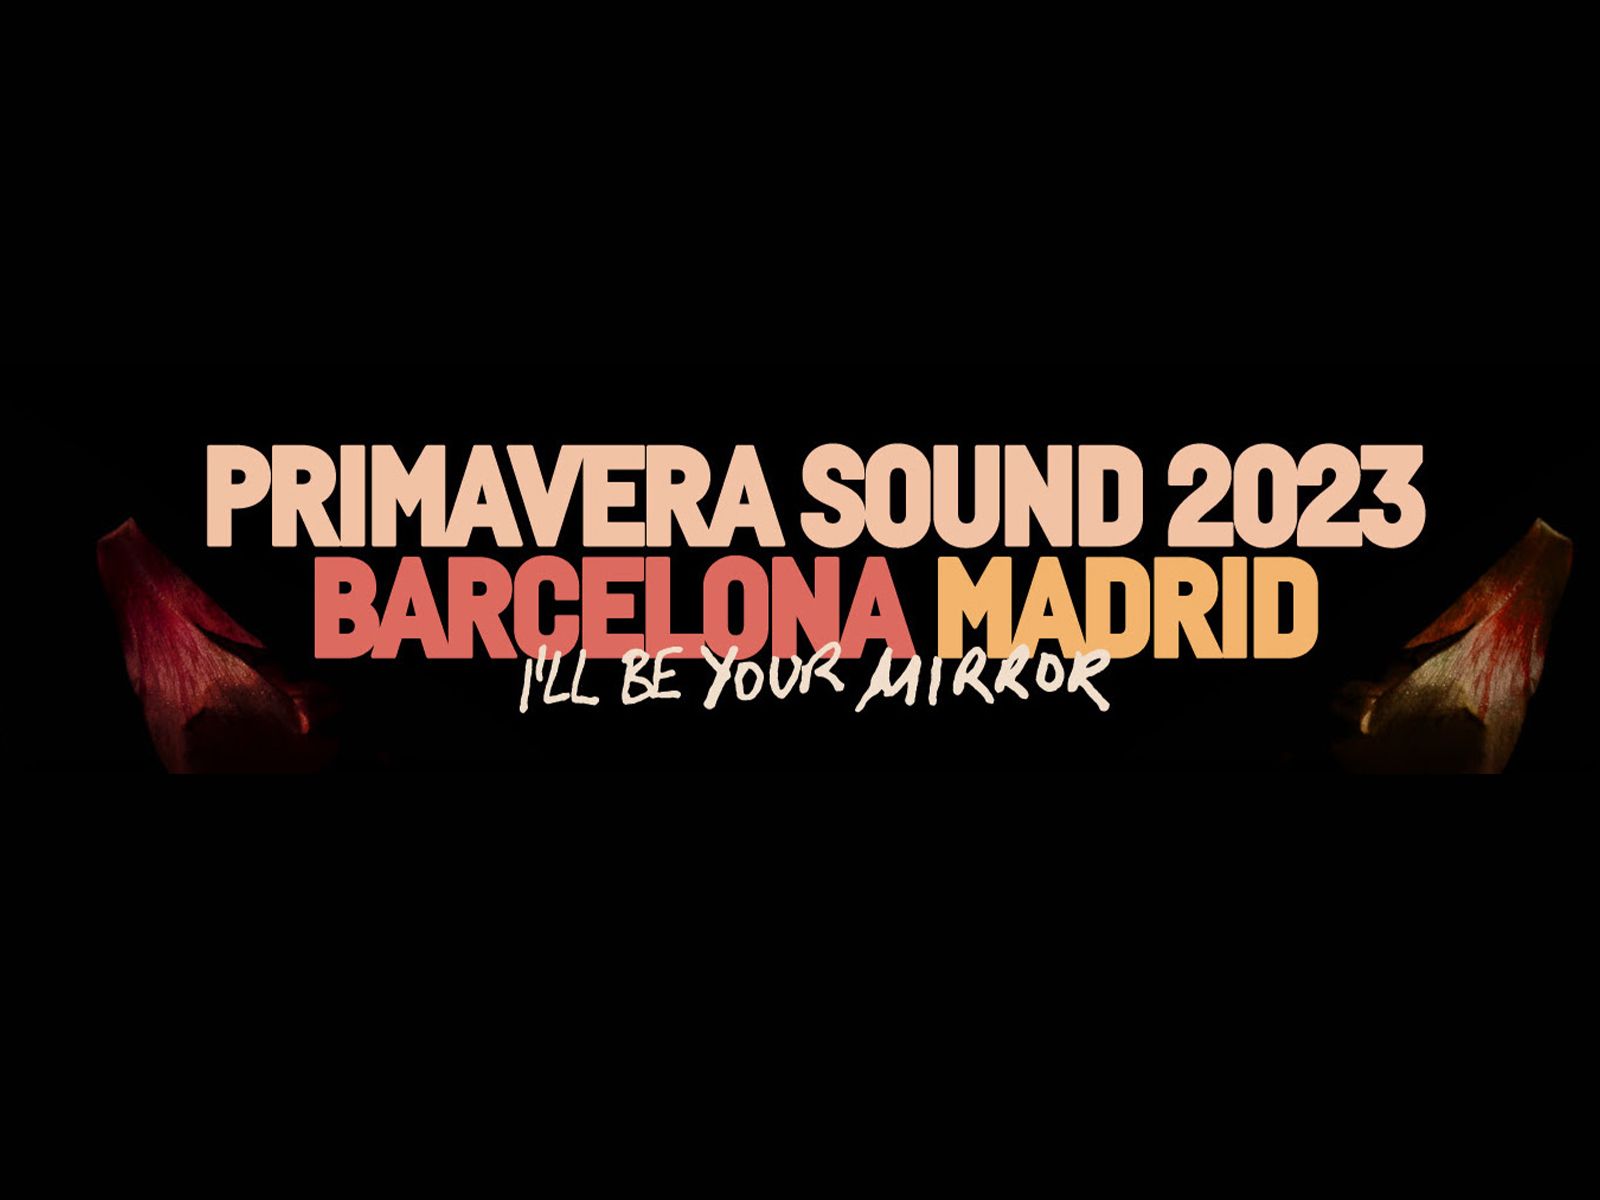 Primavera Sound unveils its line-up for the 2023 edition in Barcelona and Madrid